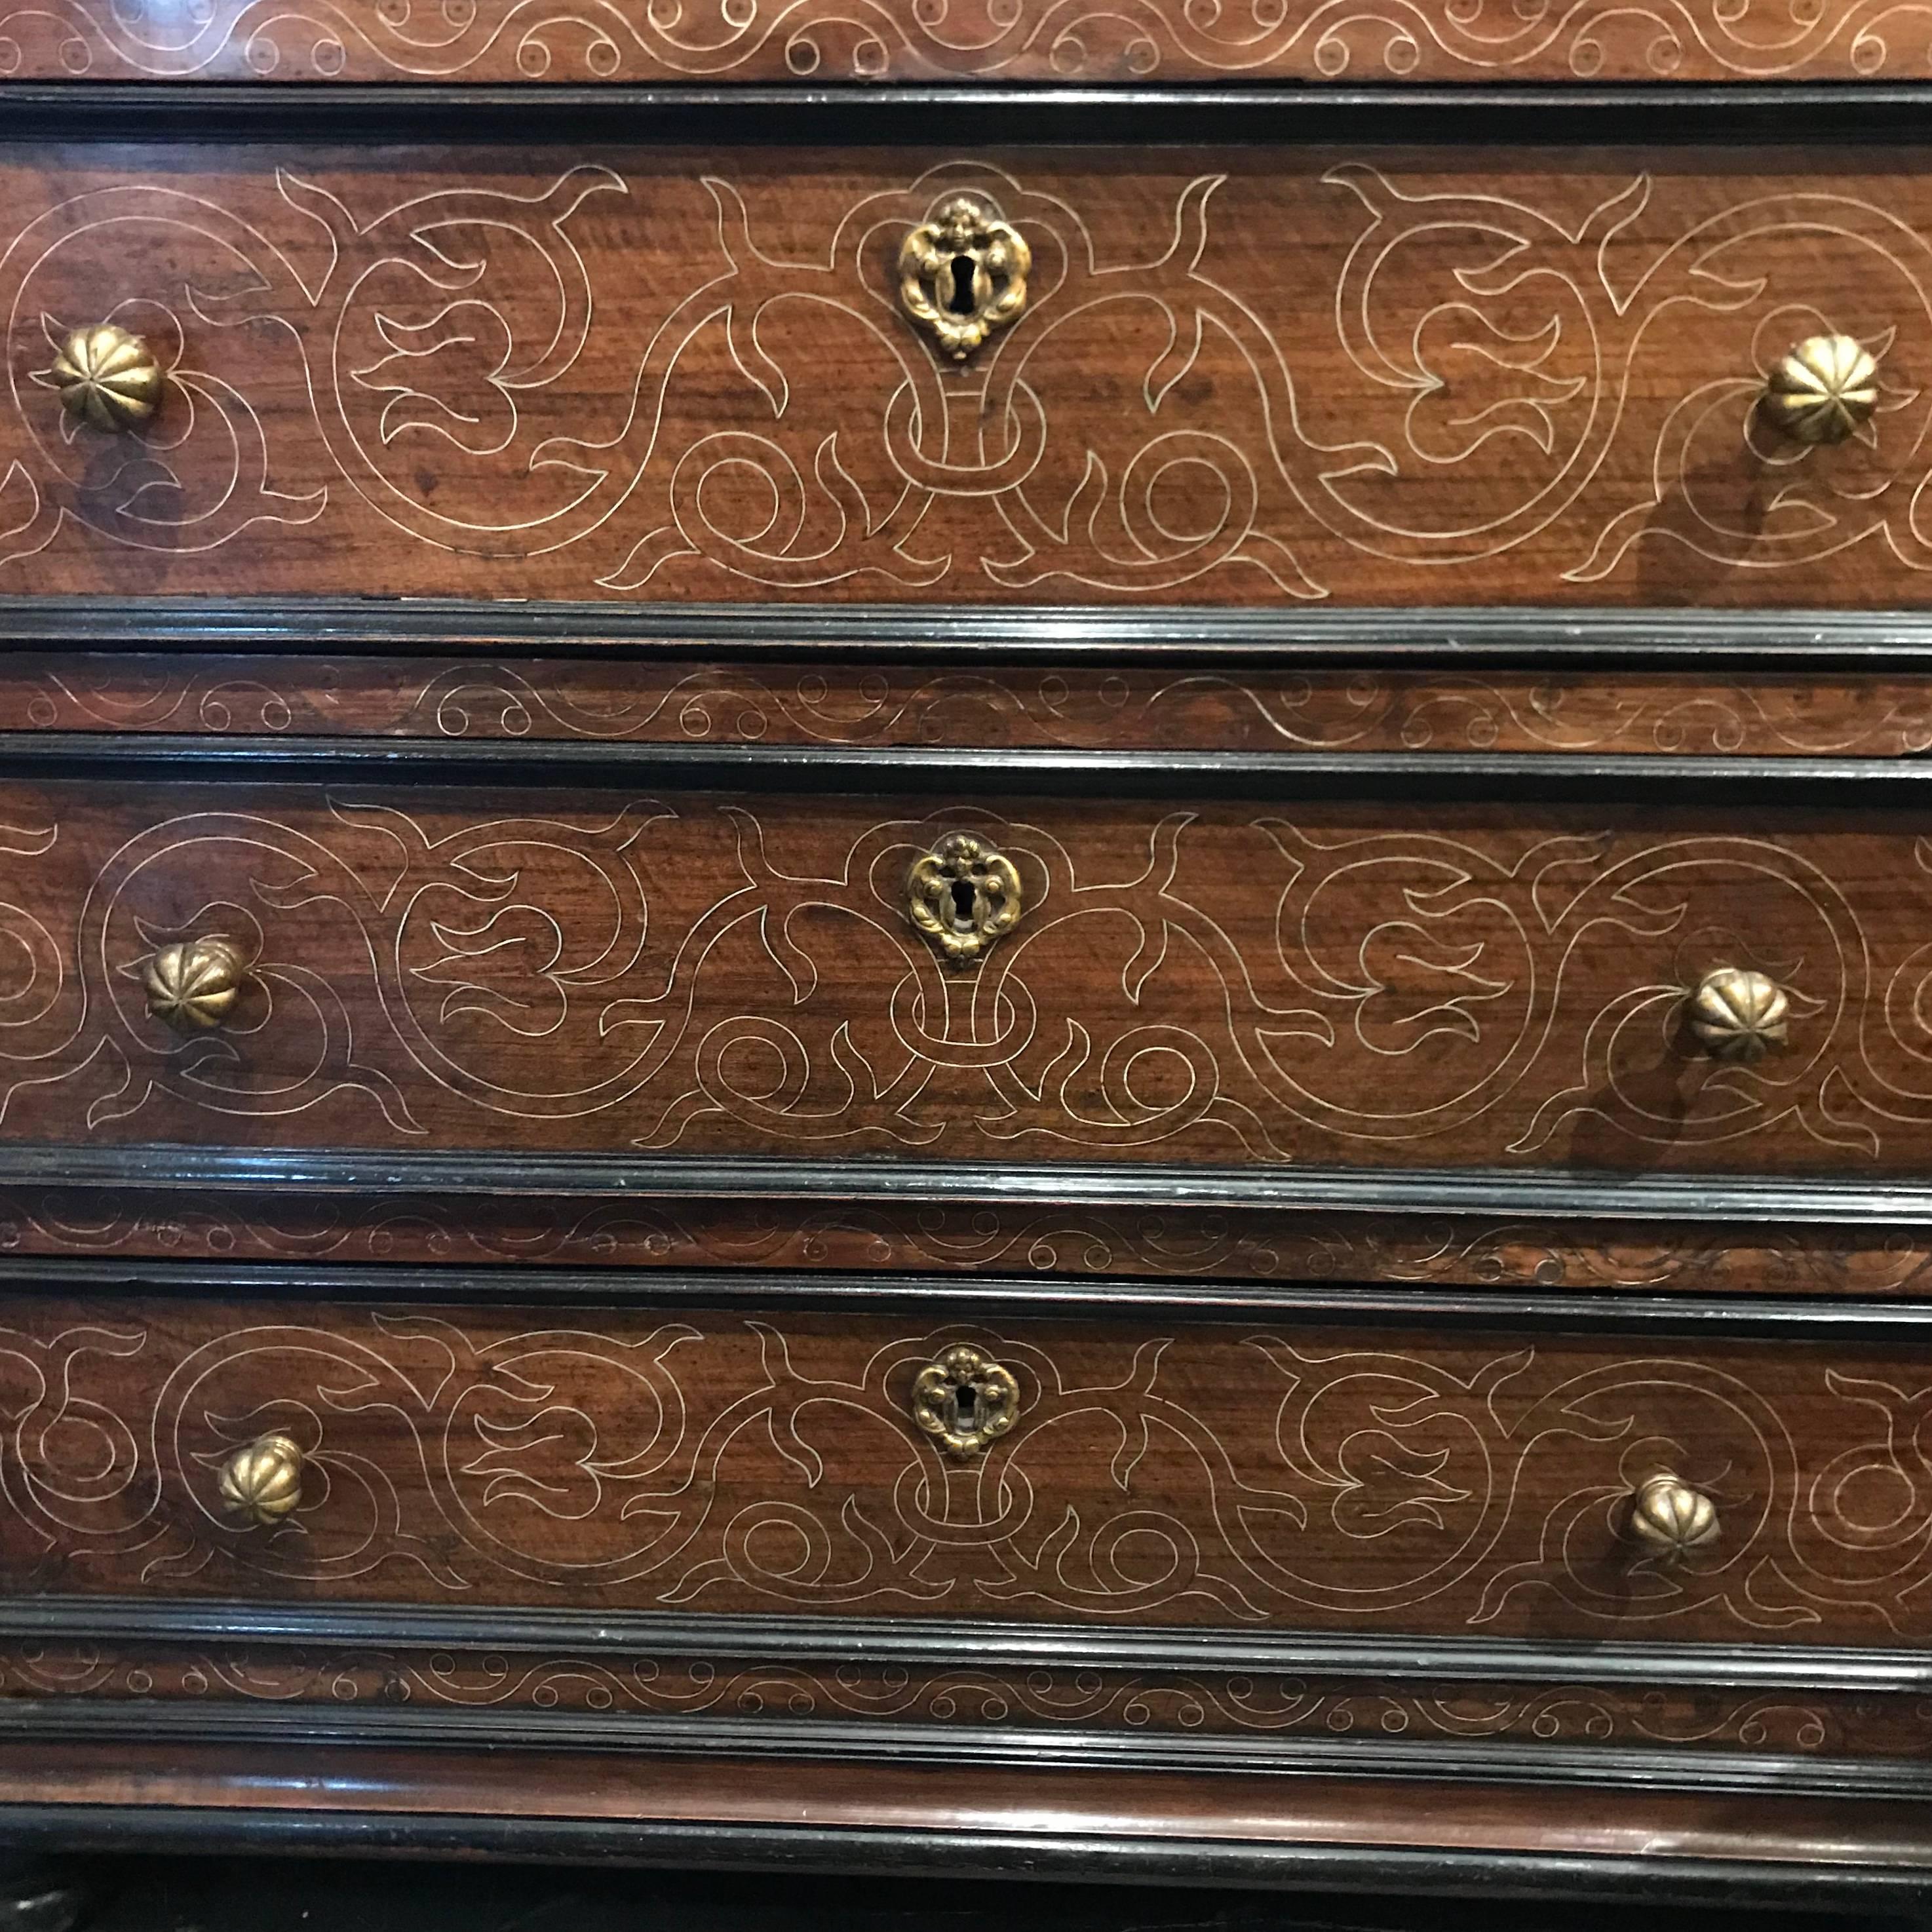 Late 17th century Italian three drawer commode with very decorative gold gilt engraved front drawers.
Bronze pulls.
Mahogany wood.
   